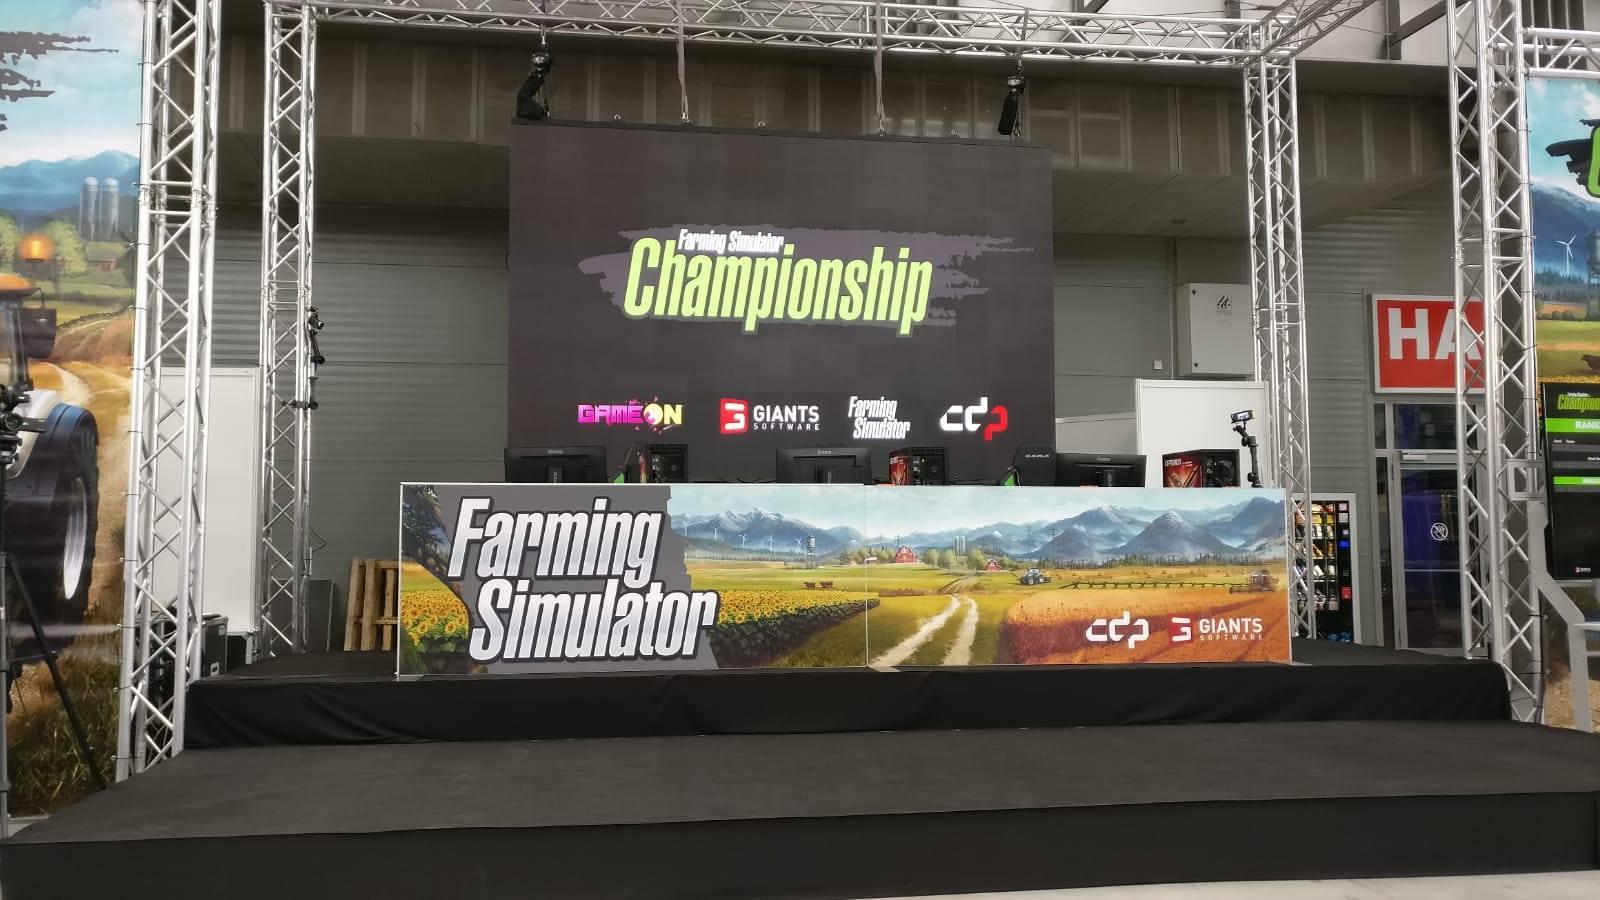 FS19 - Championship Streamed Live From The Gameon In Kielce, Poland